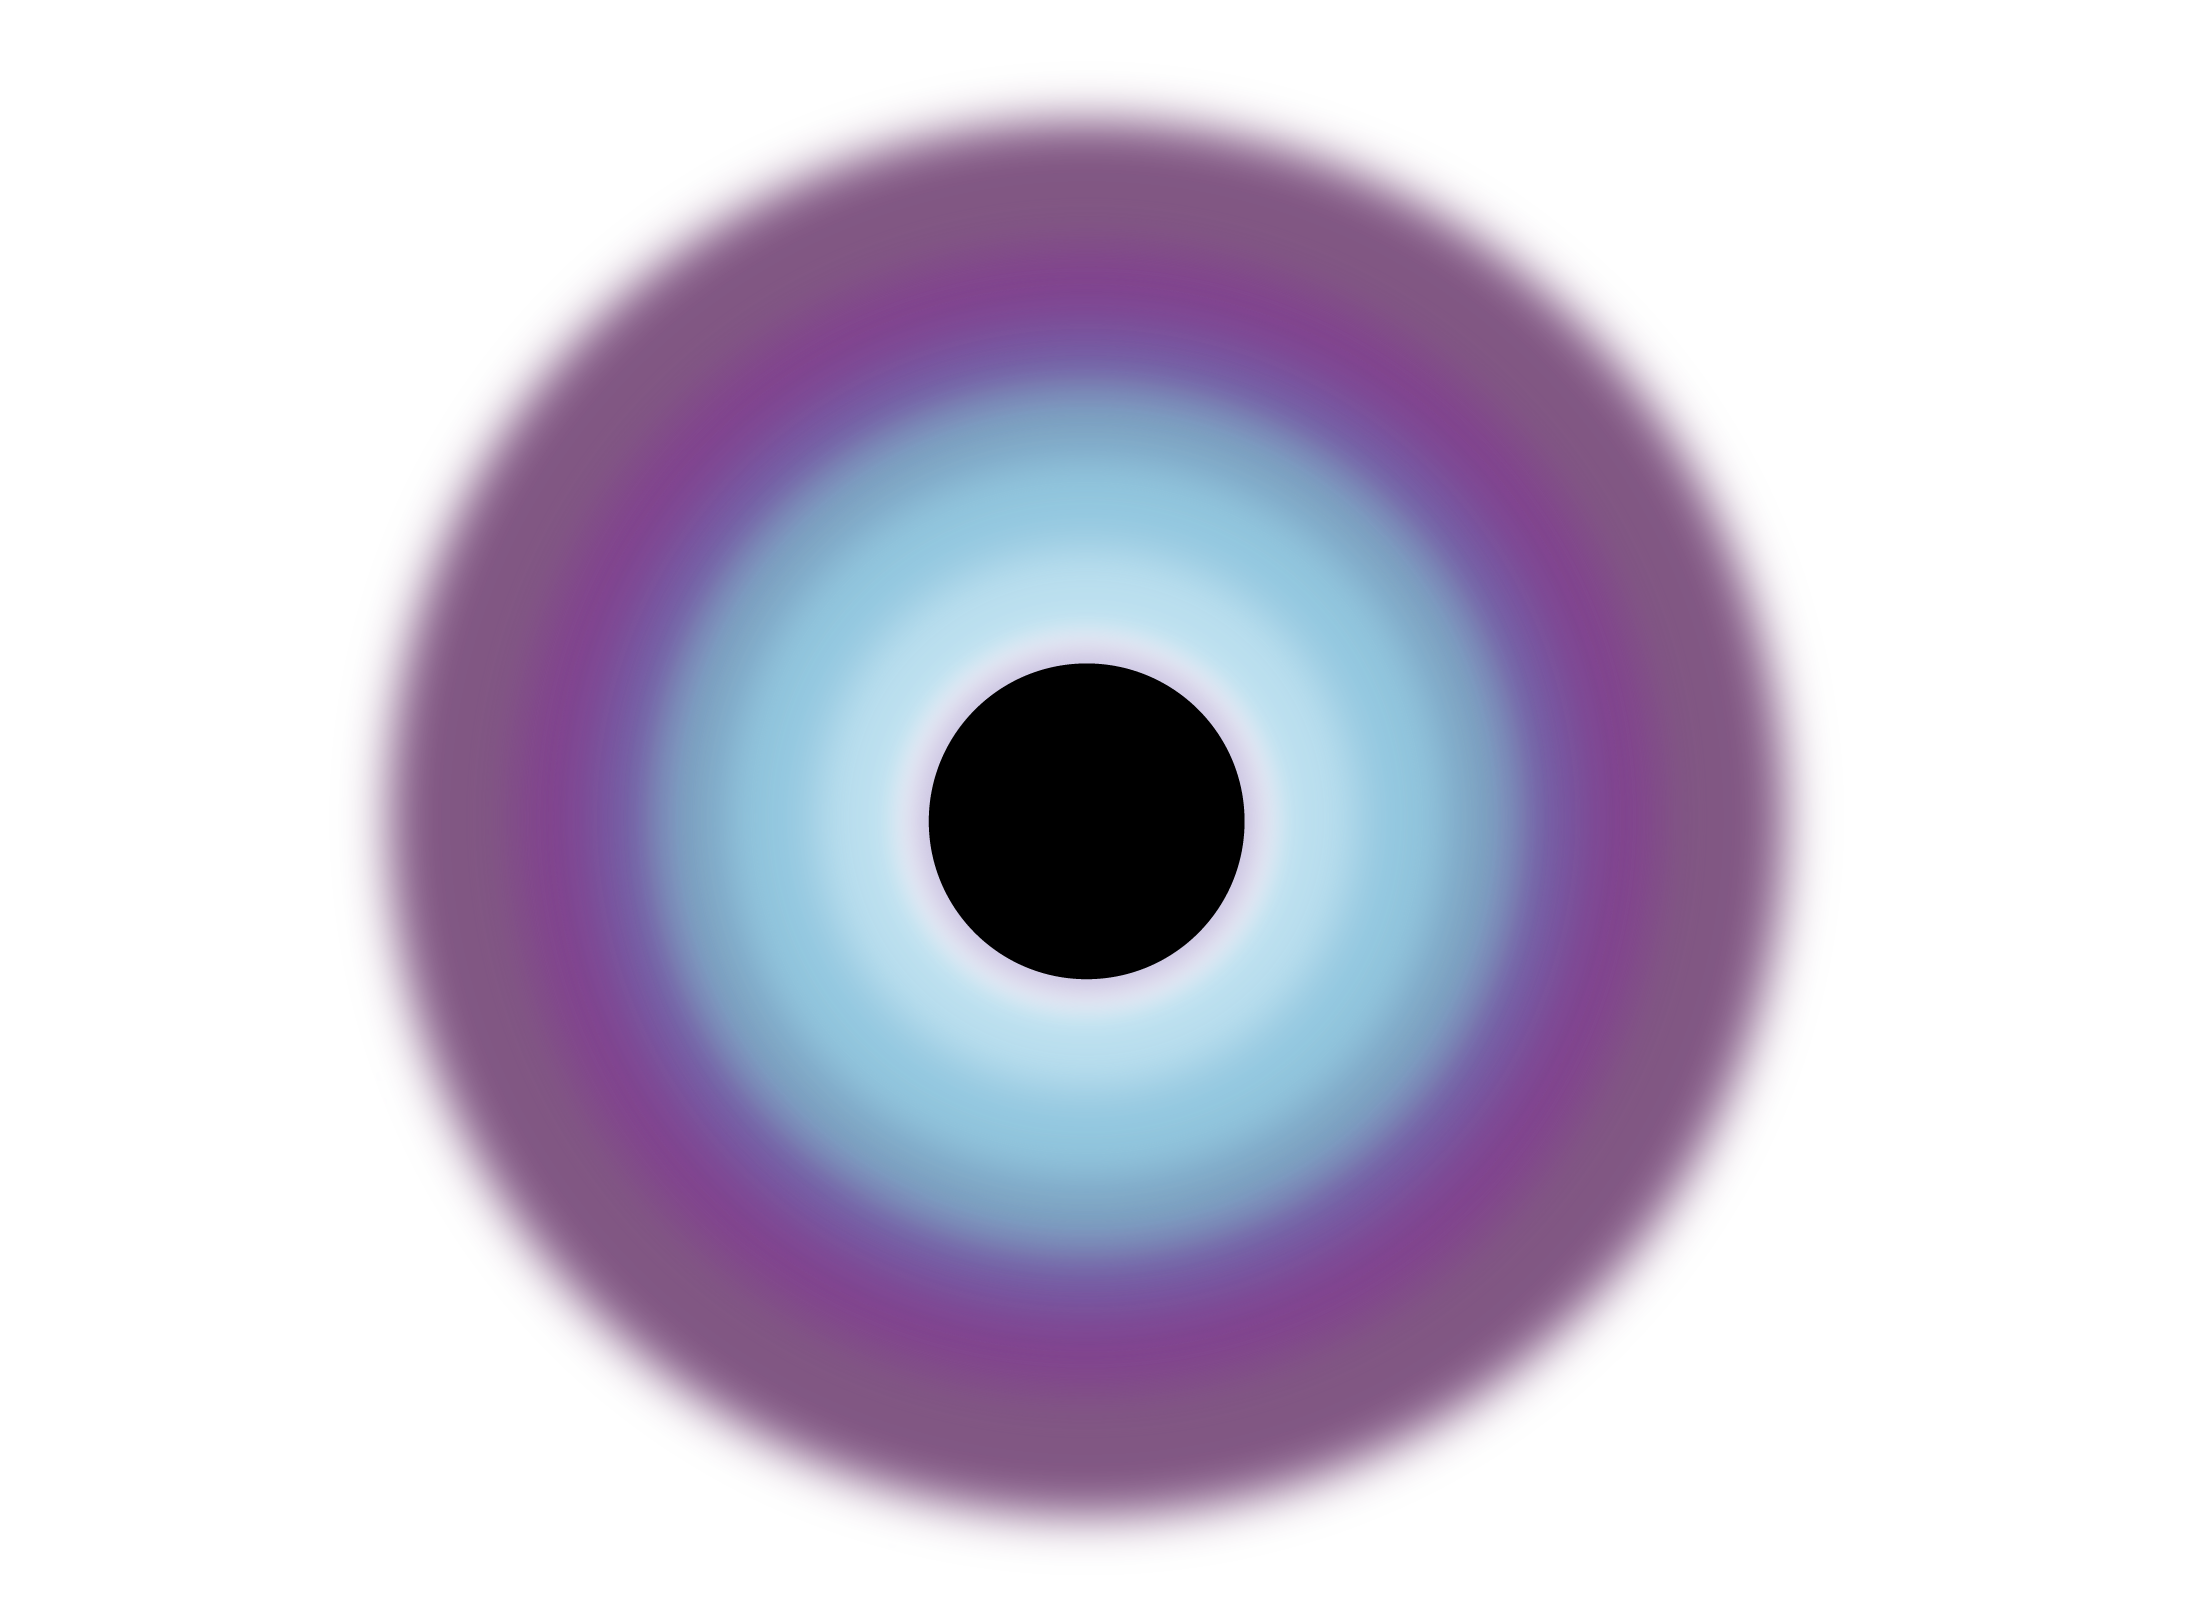 A graphic shows a dark but diffuse purple ring that is centered in the image. The dark purple fades into a bright purple, then a light blue that fades lighter towards the center where there is a bold, black circle.